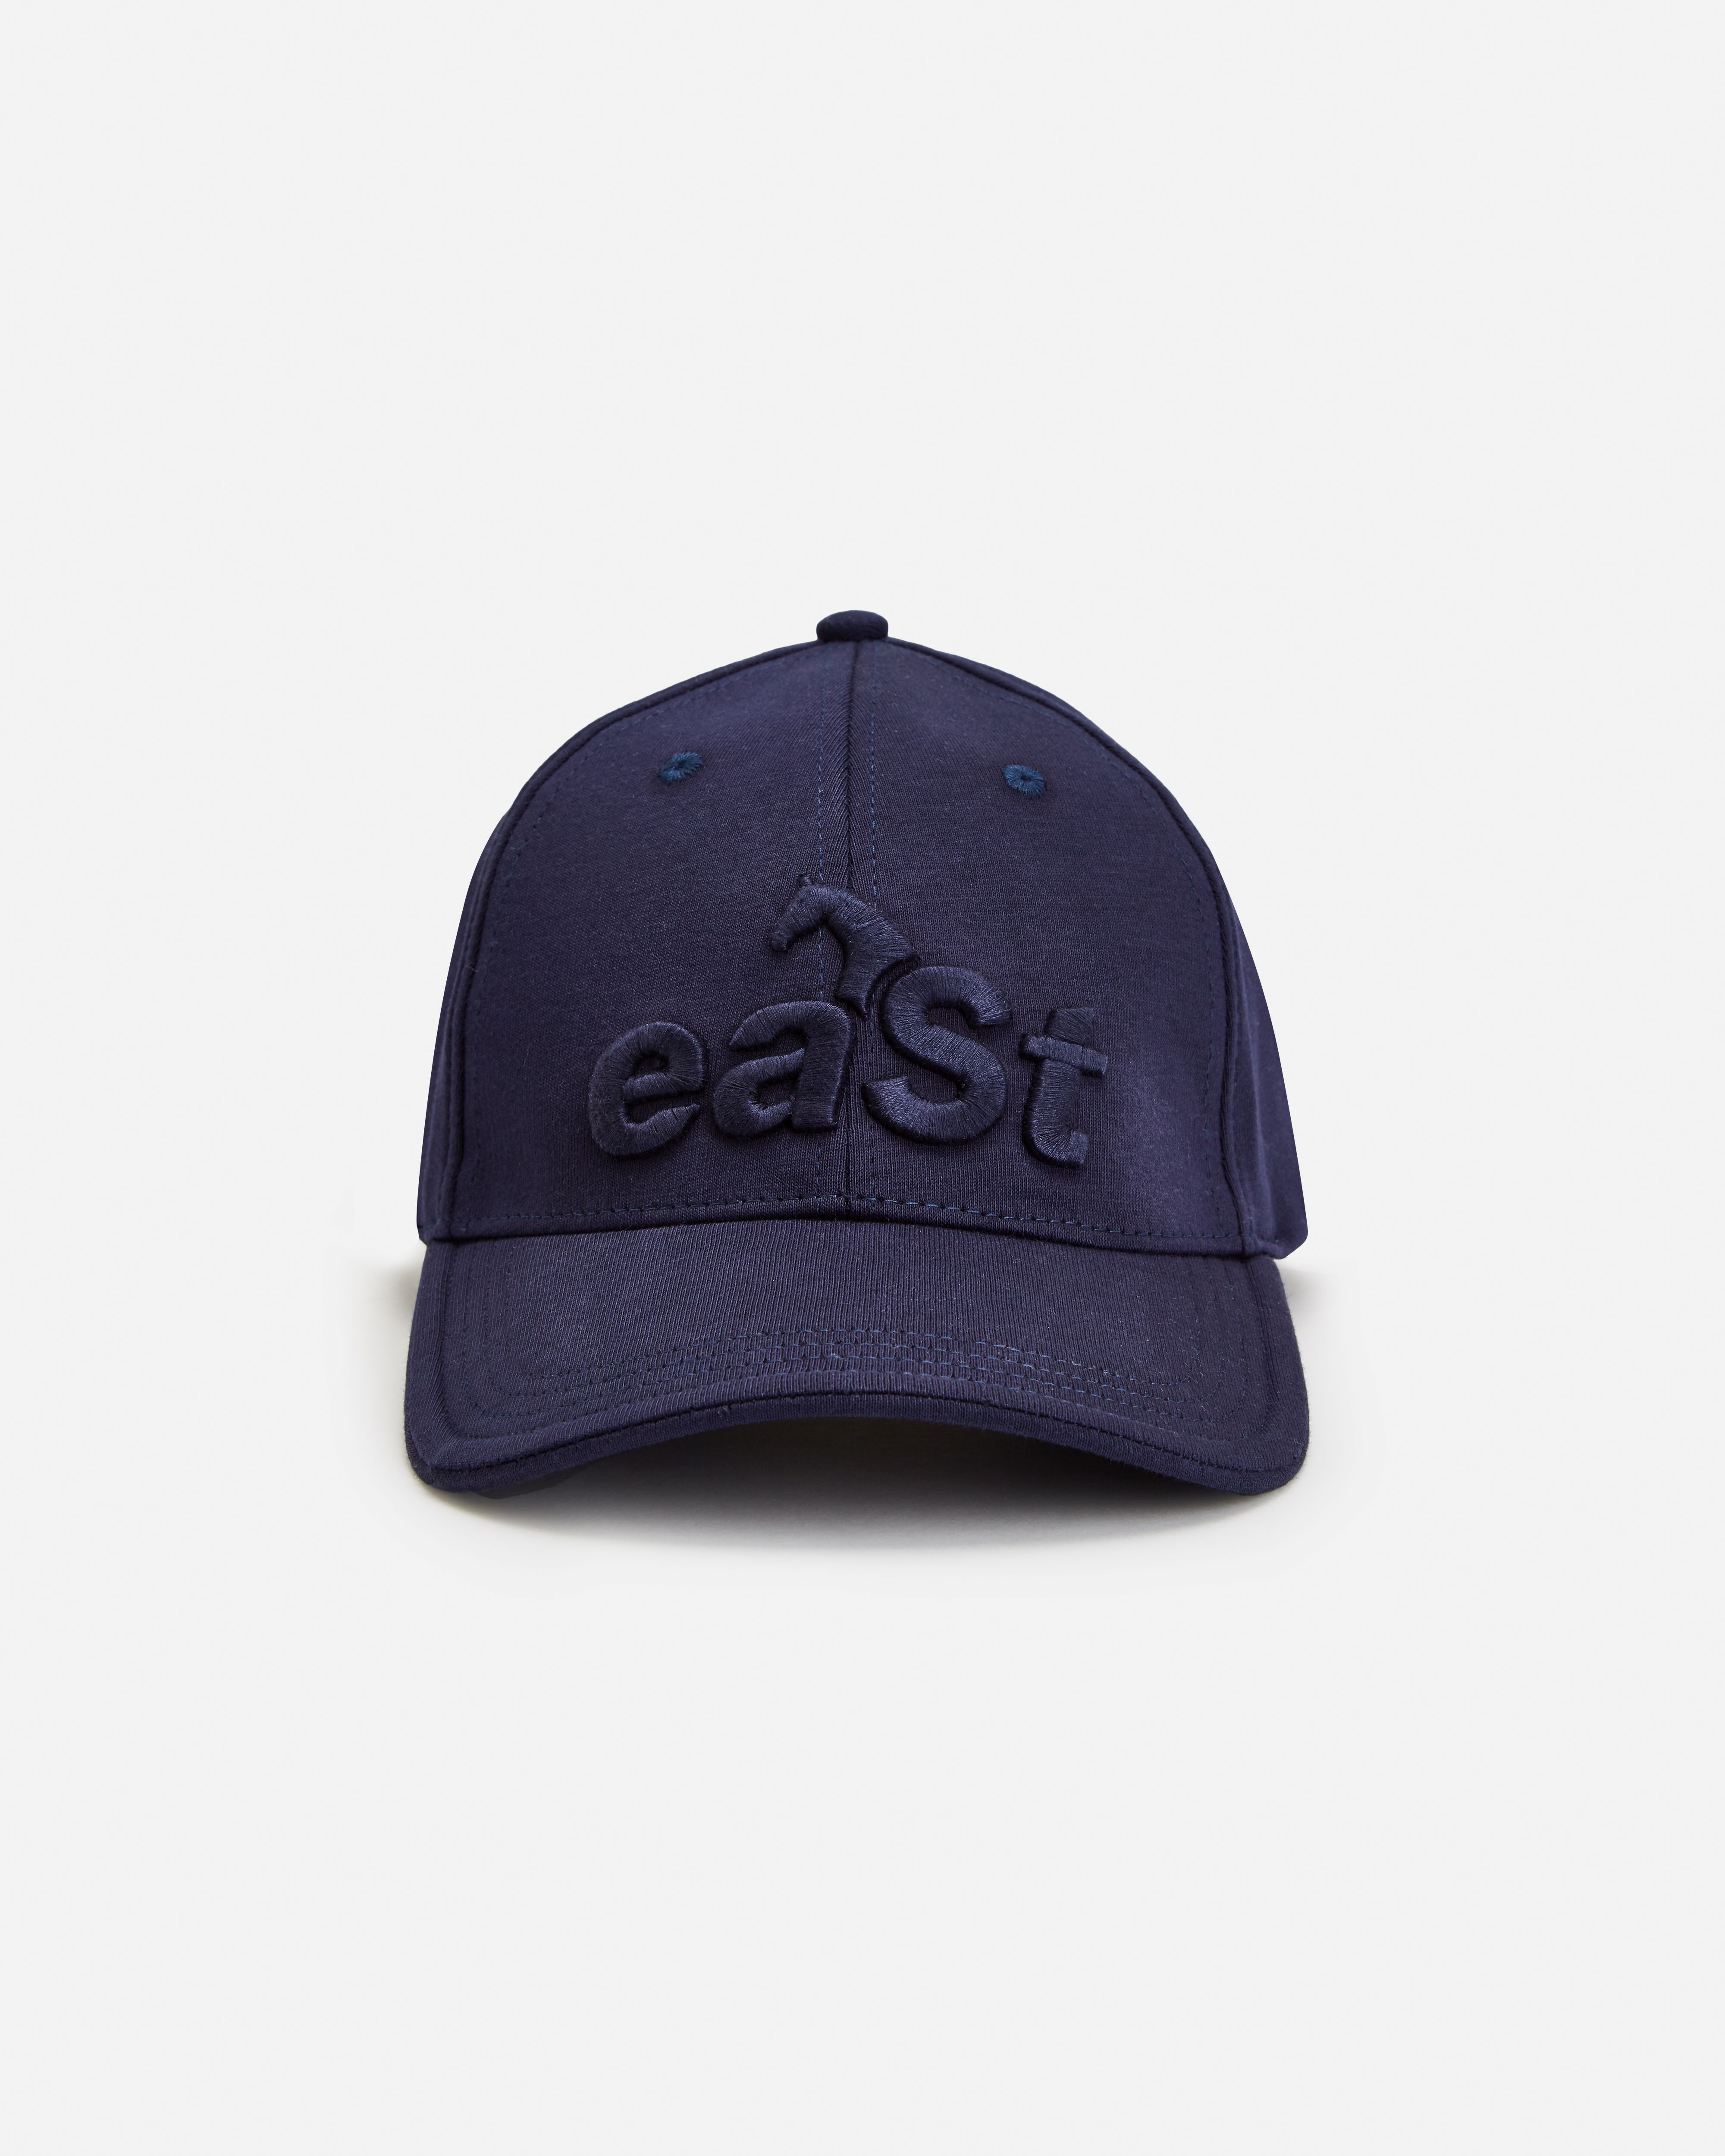 eaSt Cap | Midnight blue | one size